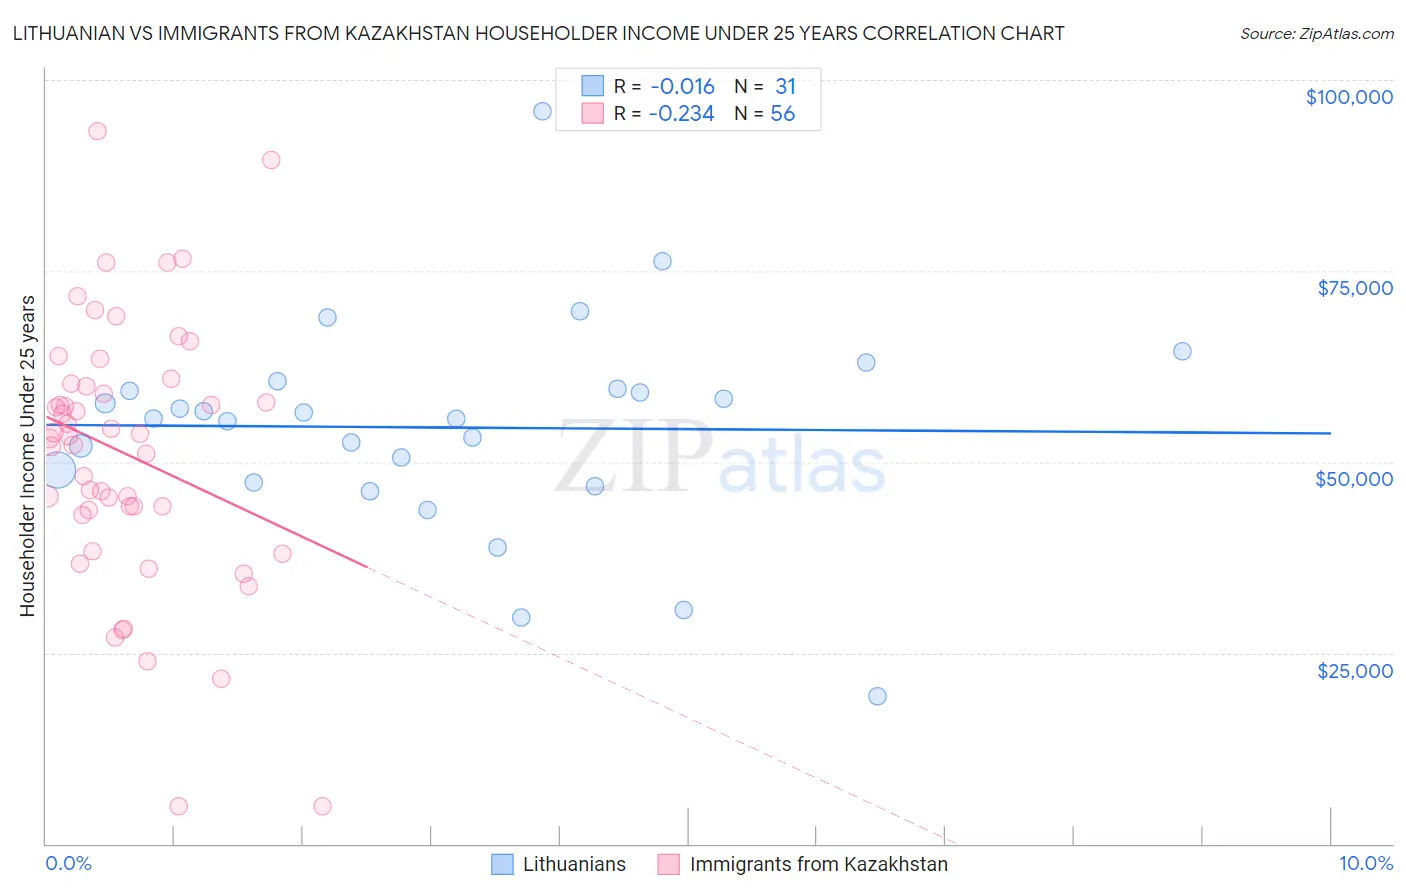 Lithuanian vs Immigrants from Kazakhstan Householder Income Under 25 years